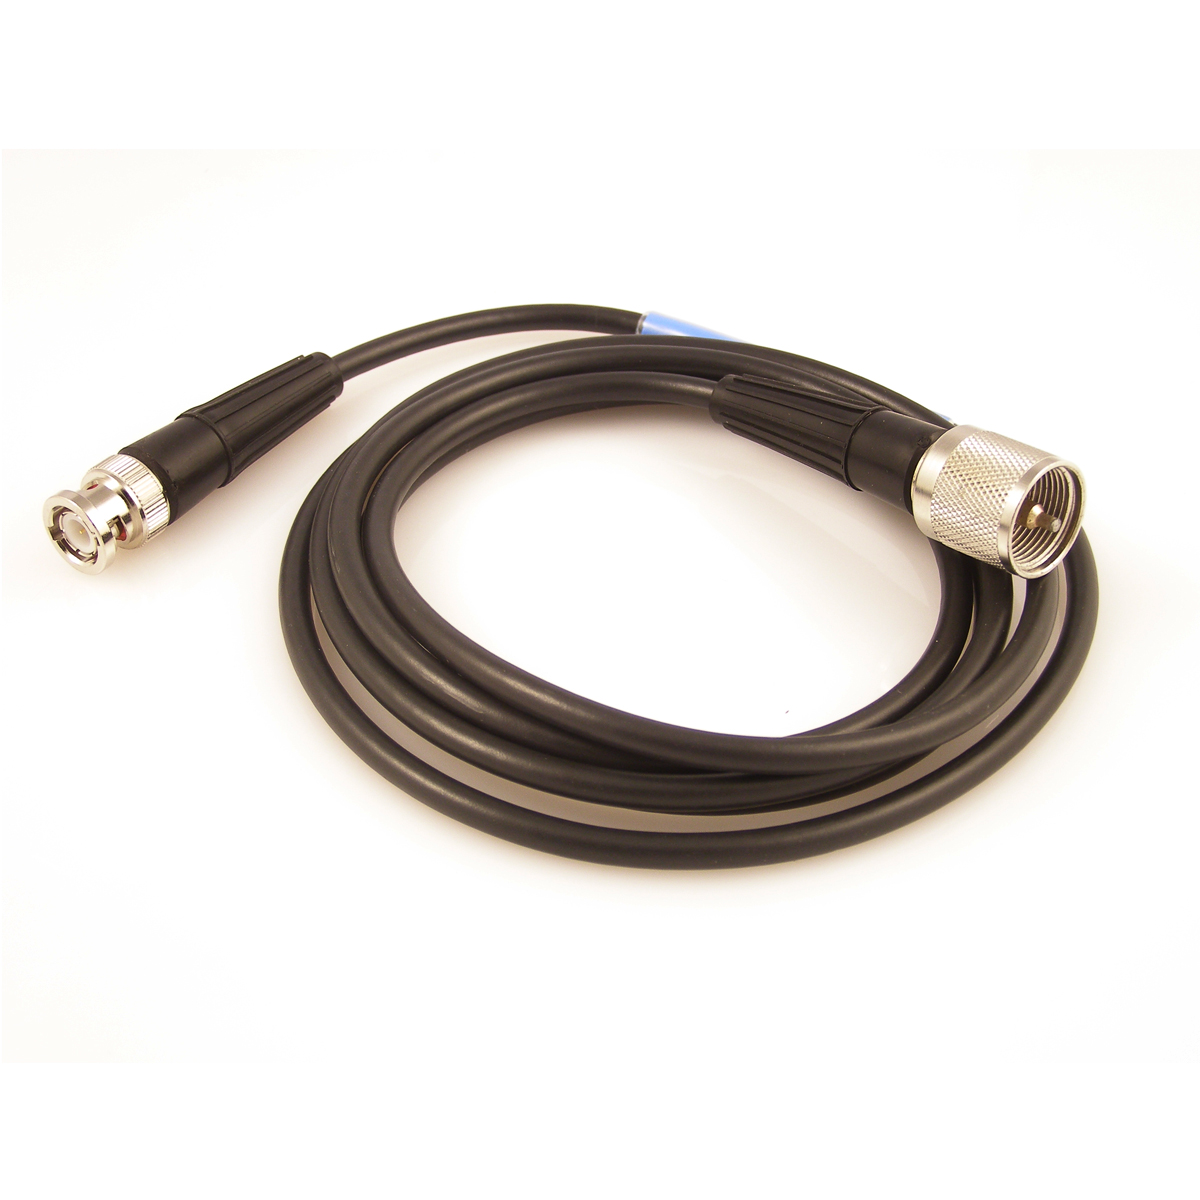 Details about   New OLYMPUS L1CB-58 L1CB-58-6 6FT TRANSDUCER CABLE BNC TO LEMO 